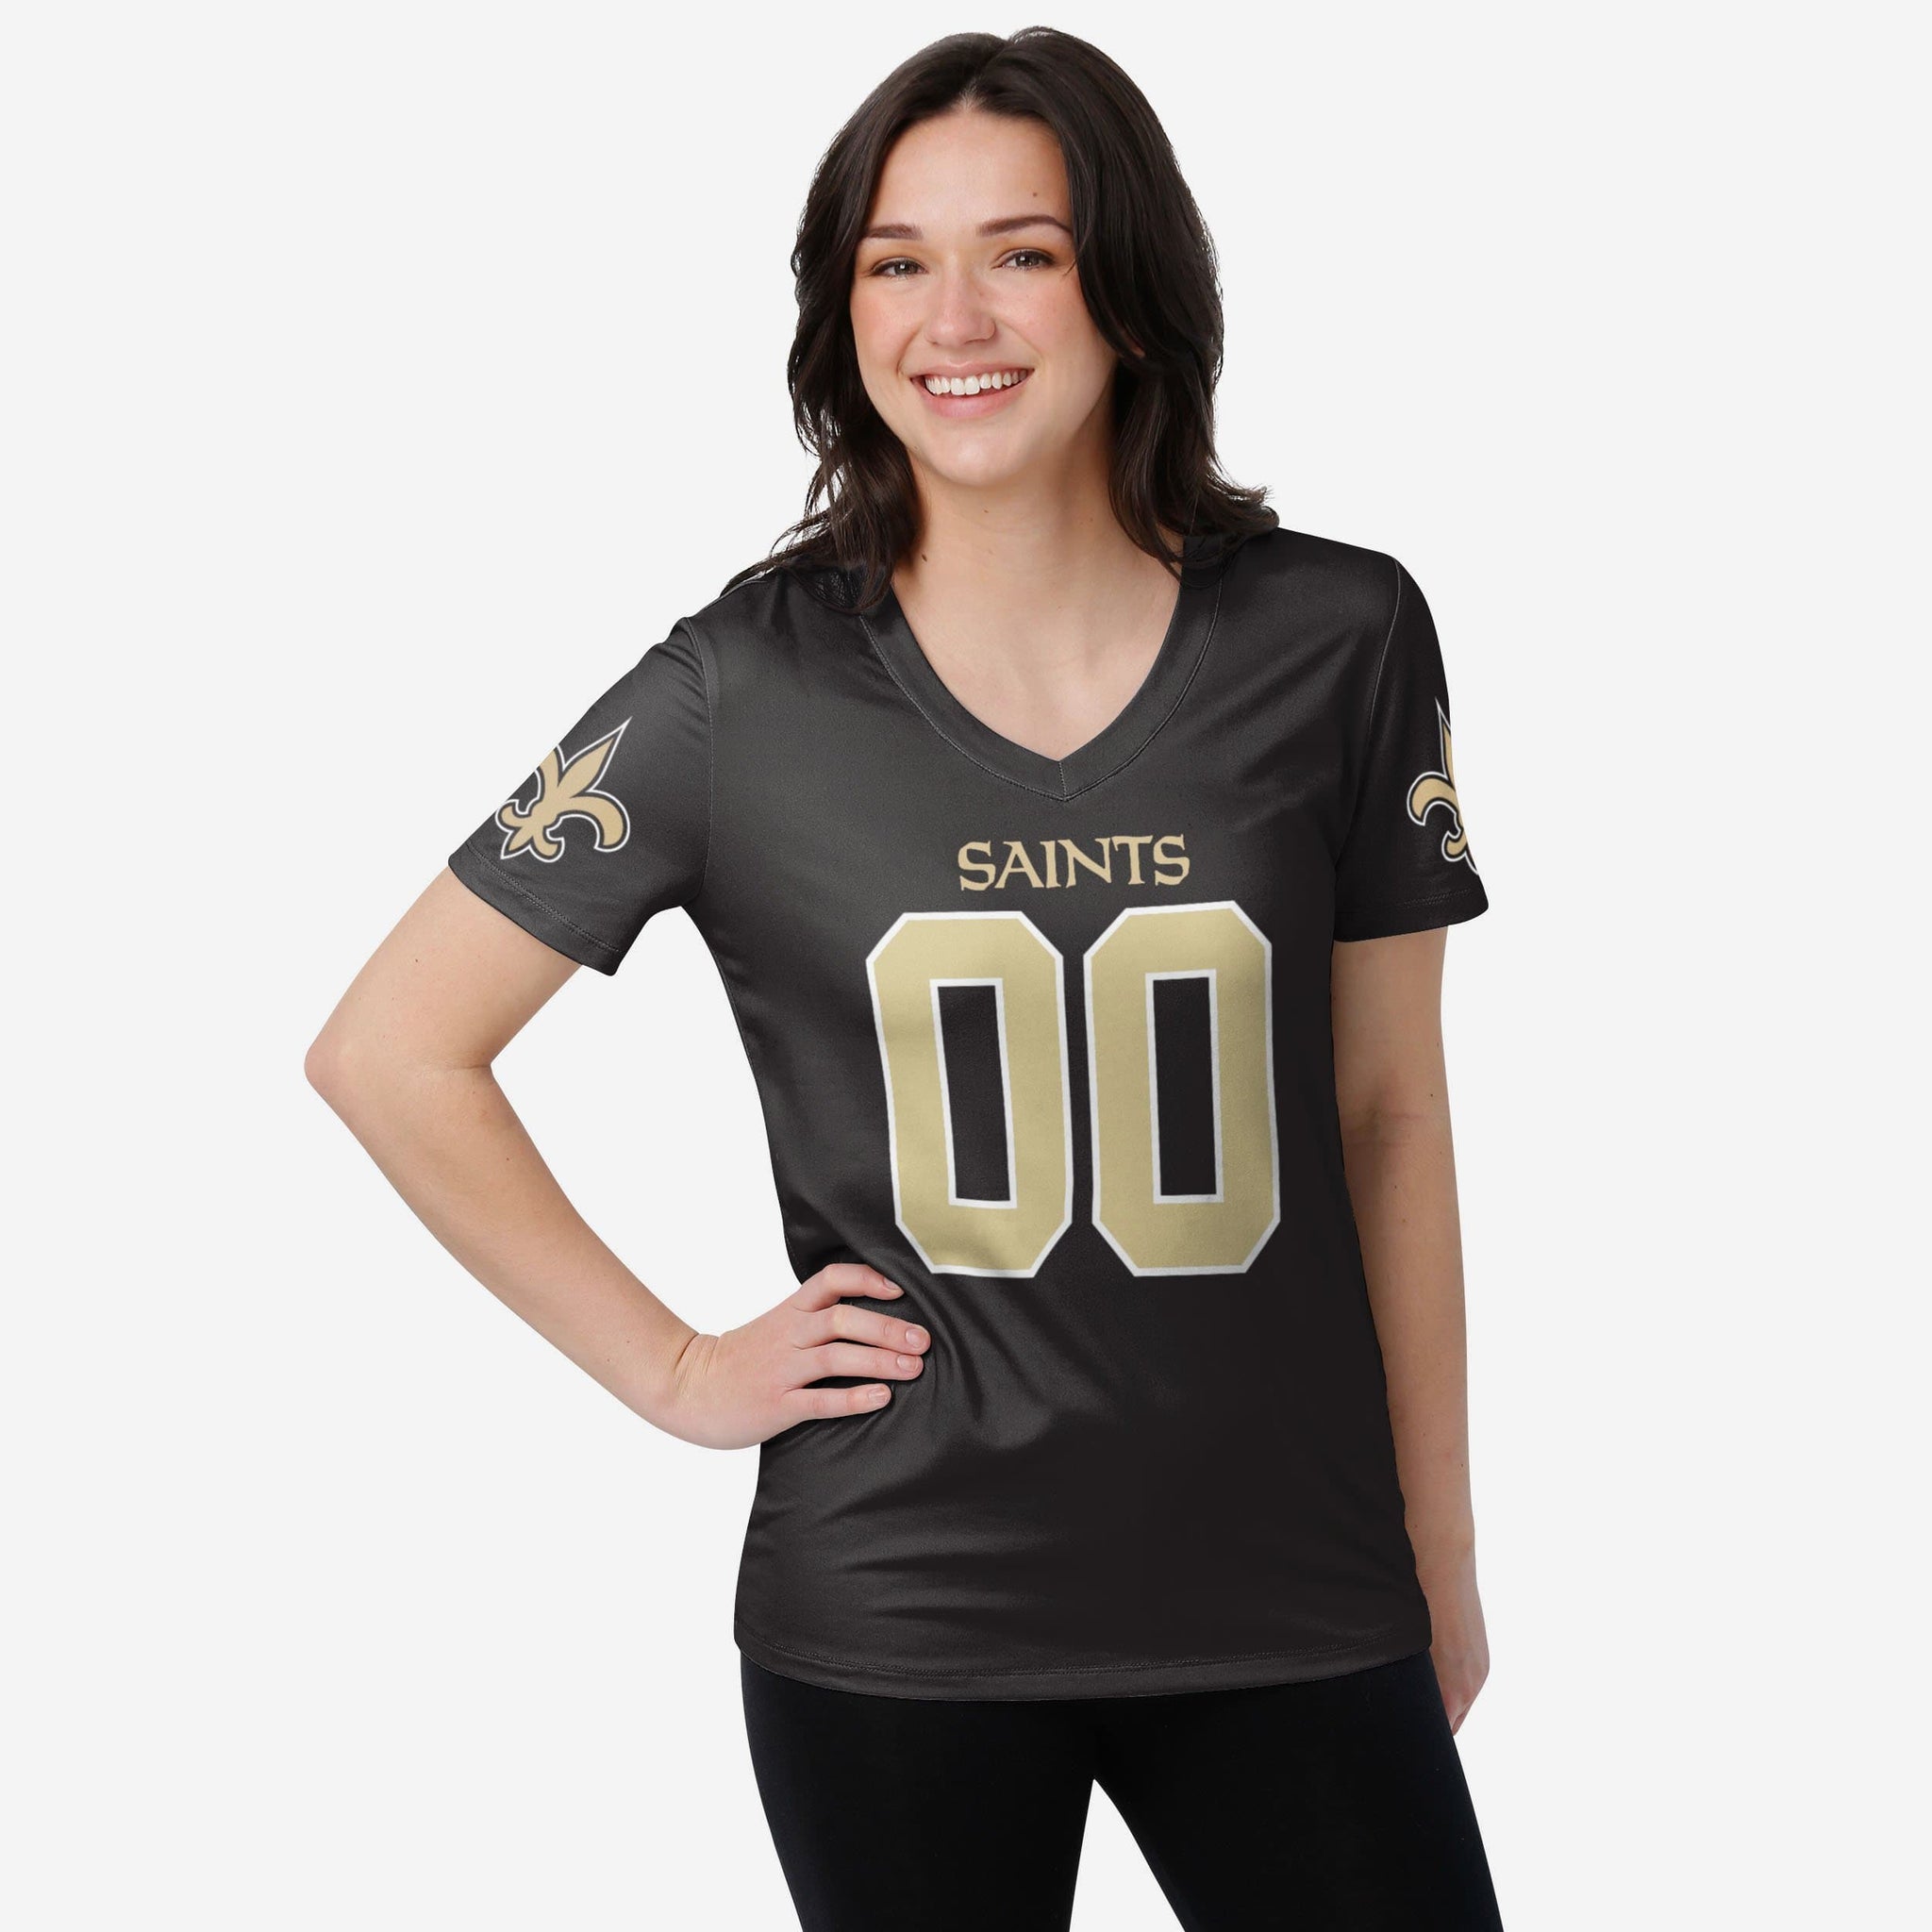 New Orleans Saints Apparel, Collectibles, and Fan Gear. FOCO